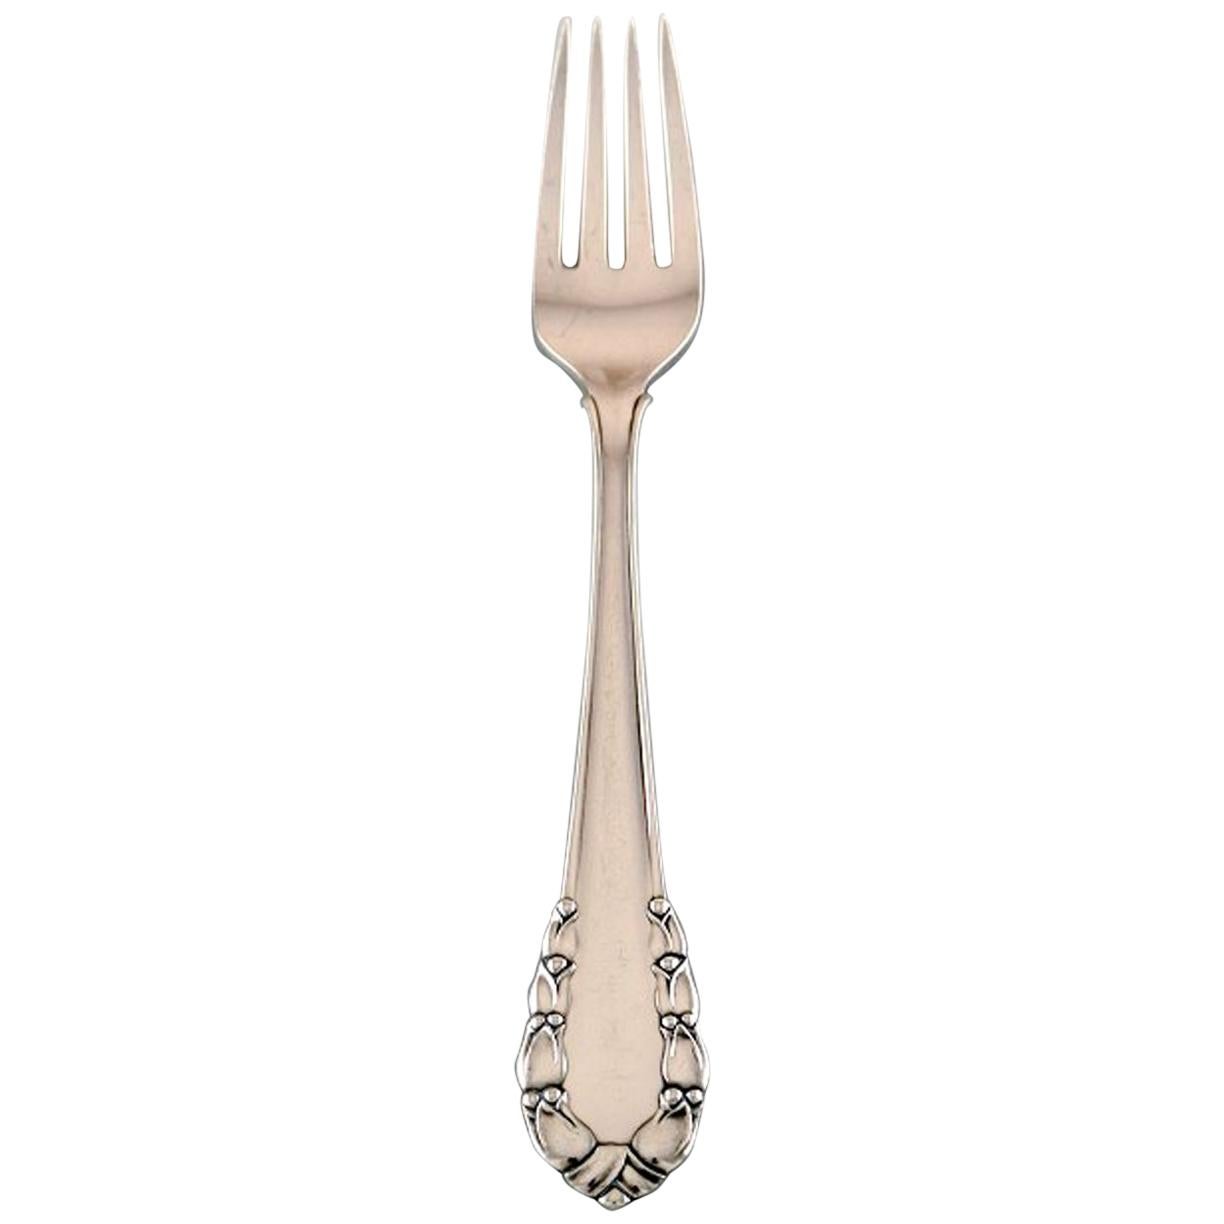 Georg Jensen "Lily of the Valley" Lunch Fork in Sterling Silver, 12 Pcs